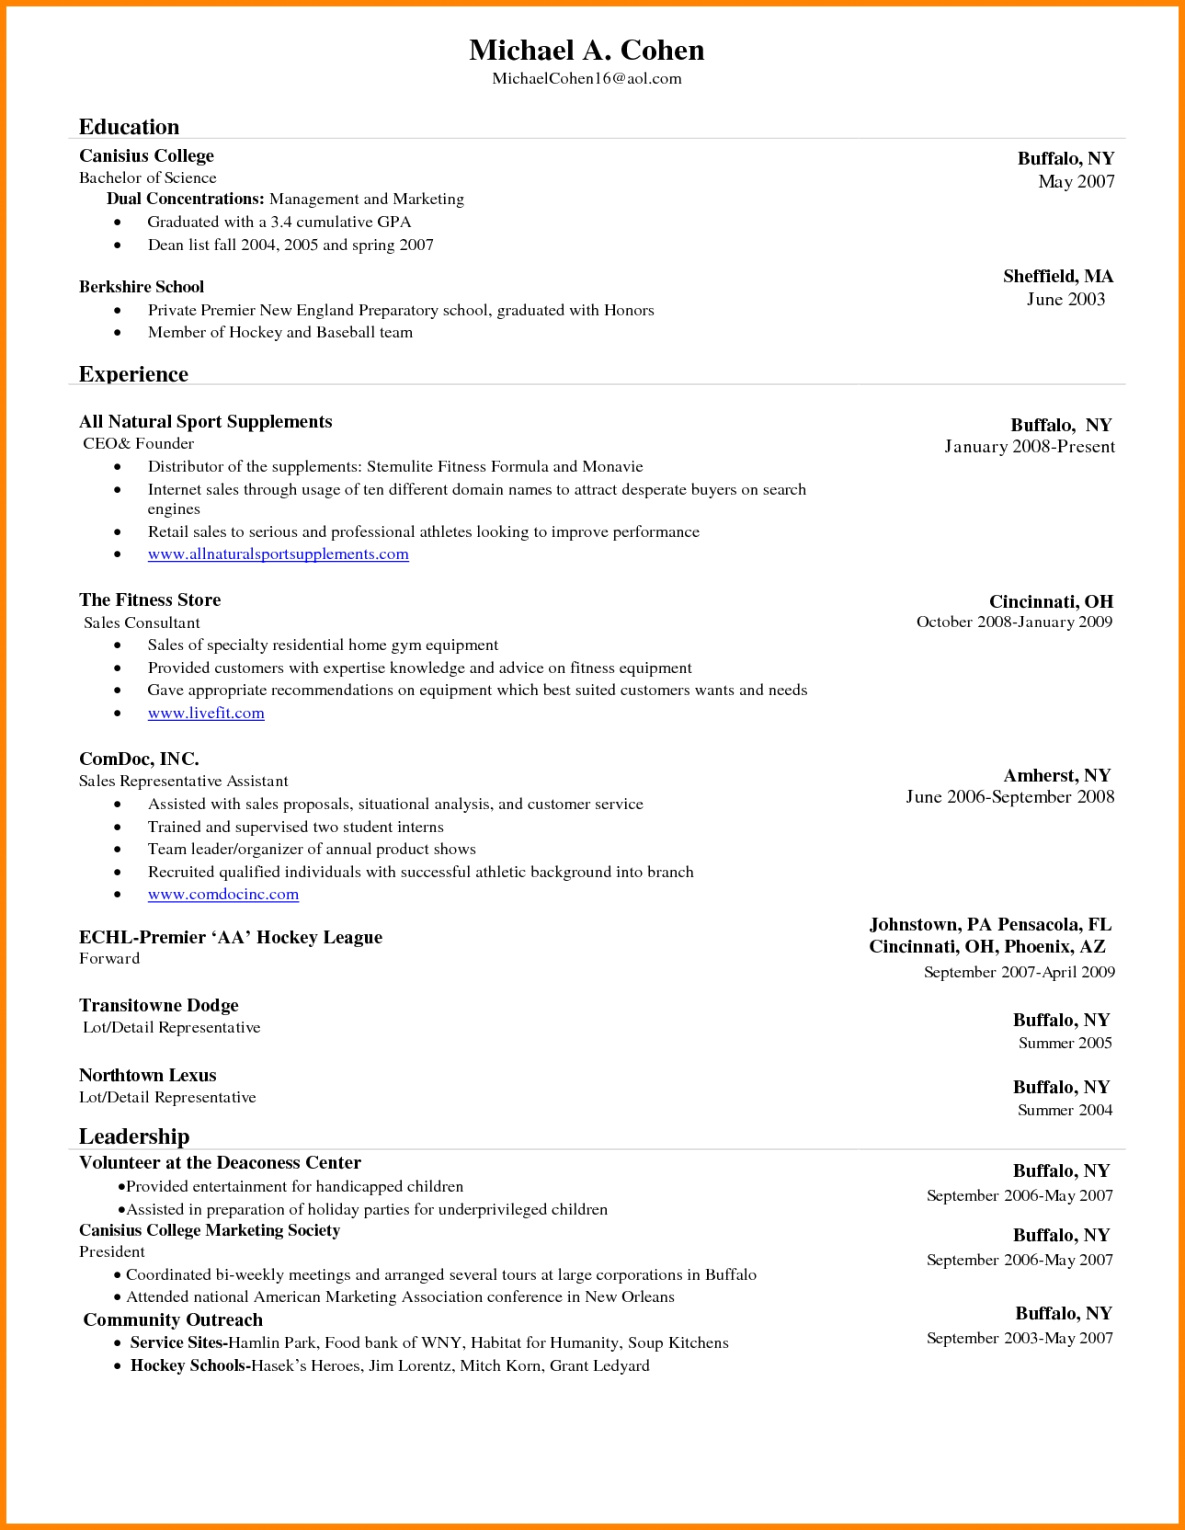 Free Resume Templates Microsoft Word Resume Template Microsoft Word 2017 Learnhowtoloseweight Net Free Resume Templates Microsoft Word 2007 free resume templates microsoft word|wikiresume.com